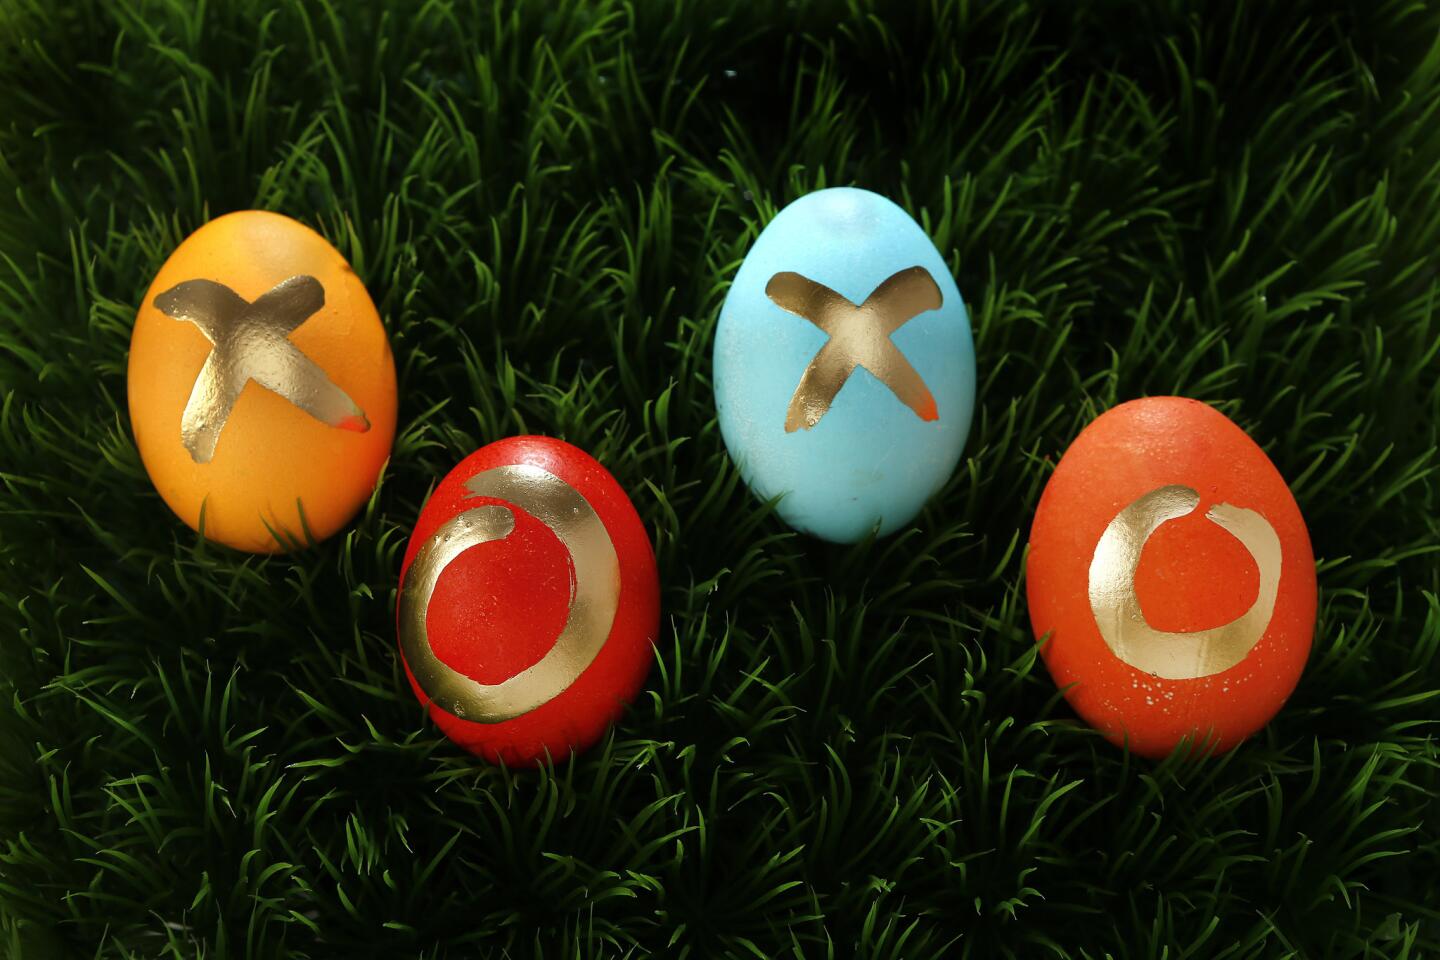 Easter eggs decorated with Kool-aid dyes and gold-colored pen.